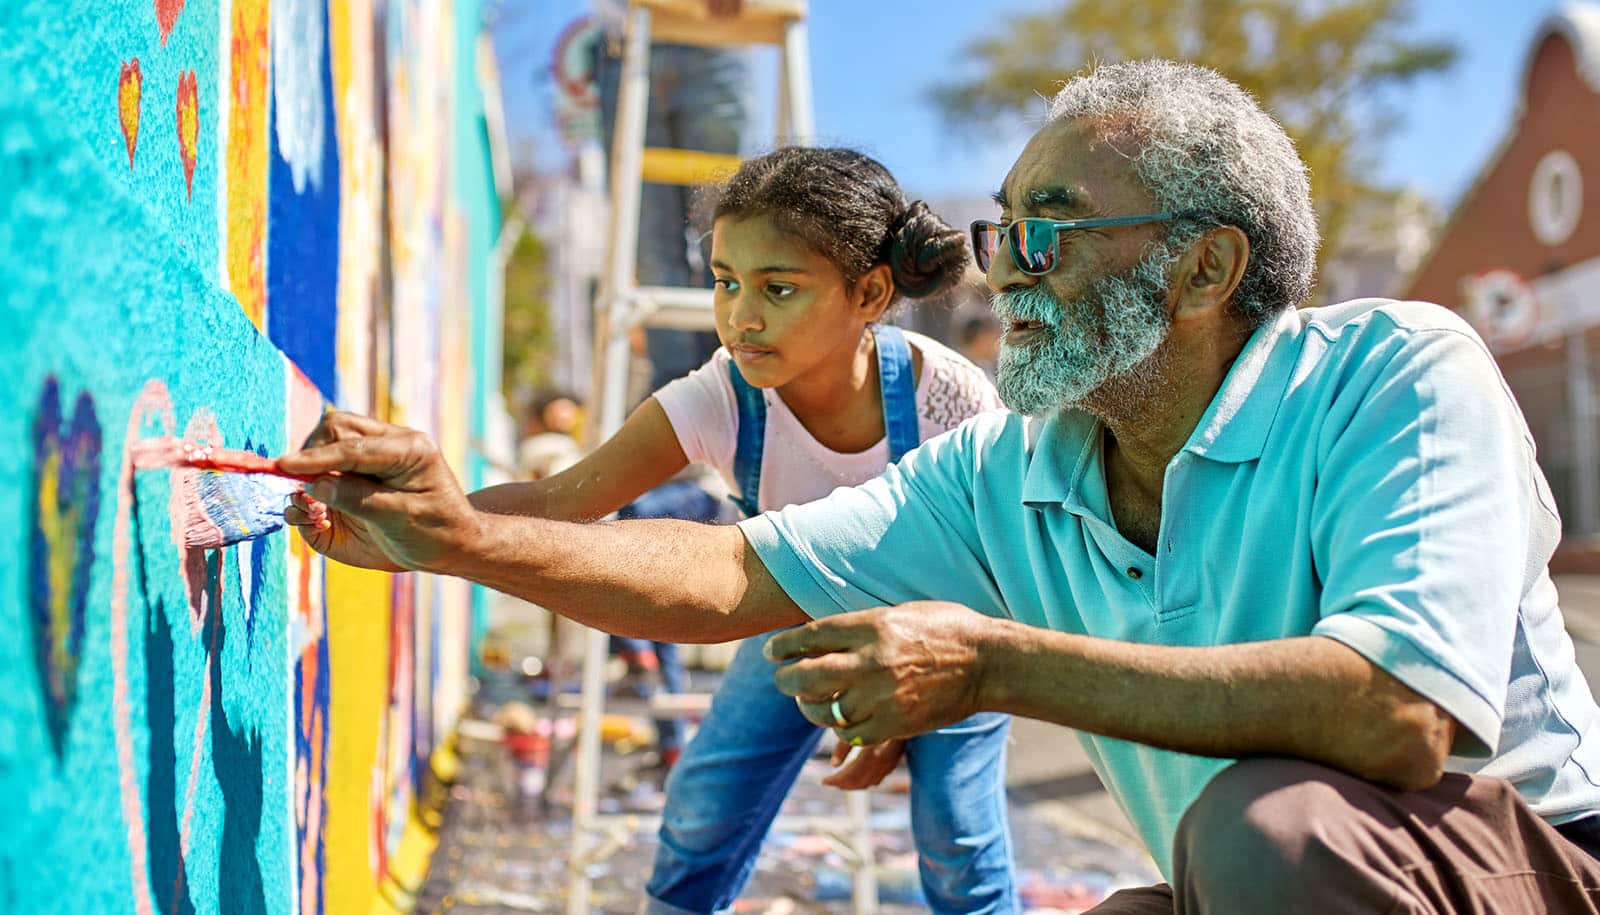 older adult and child paint mural outdoors